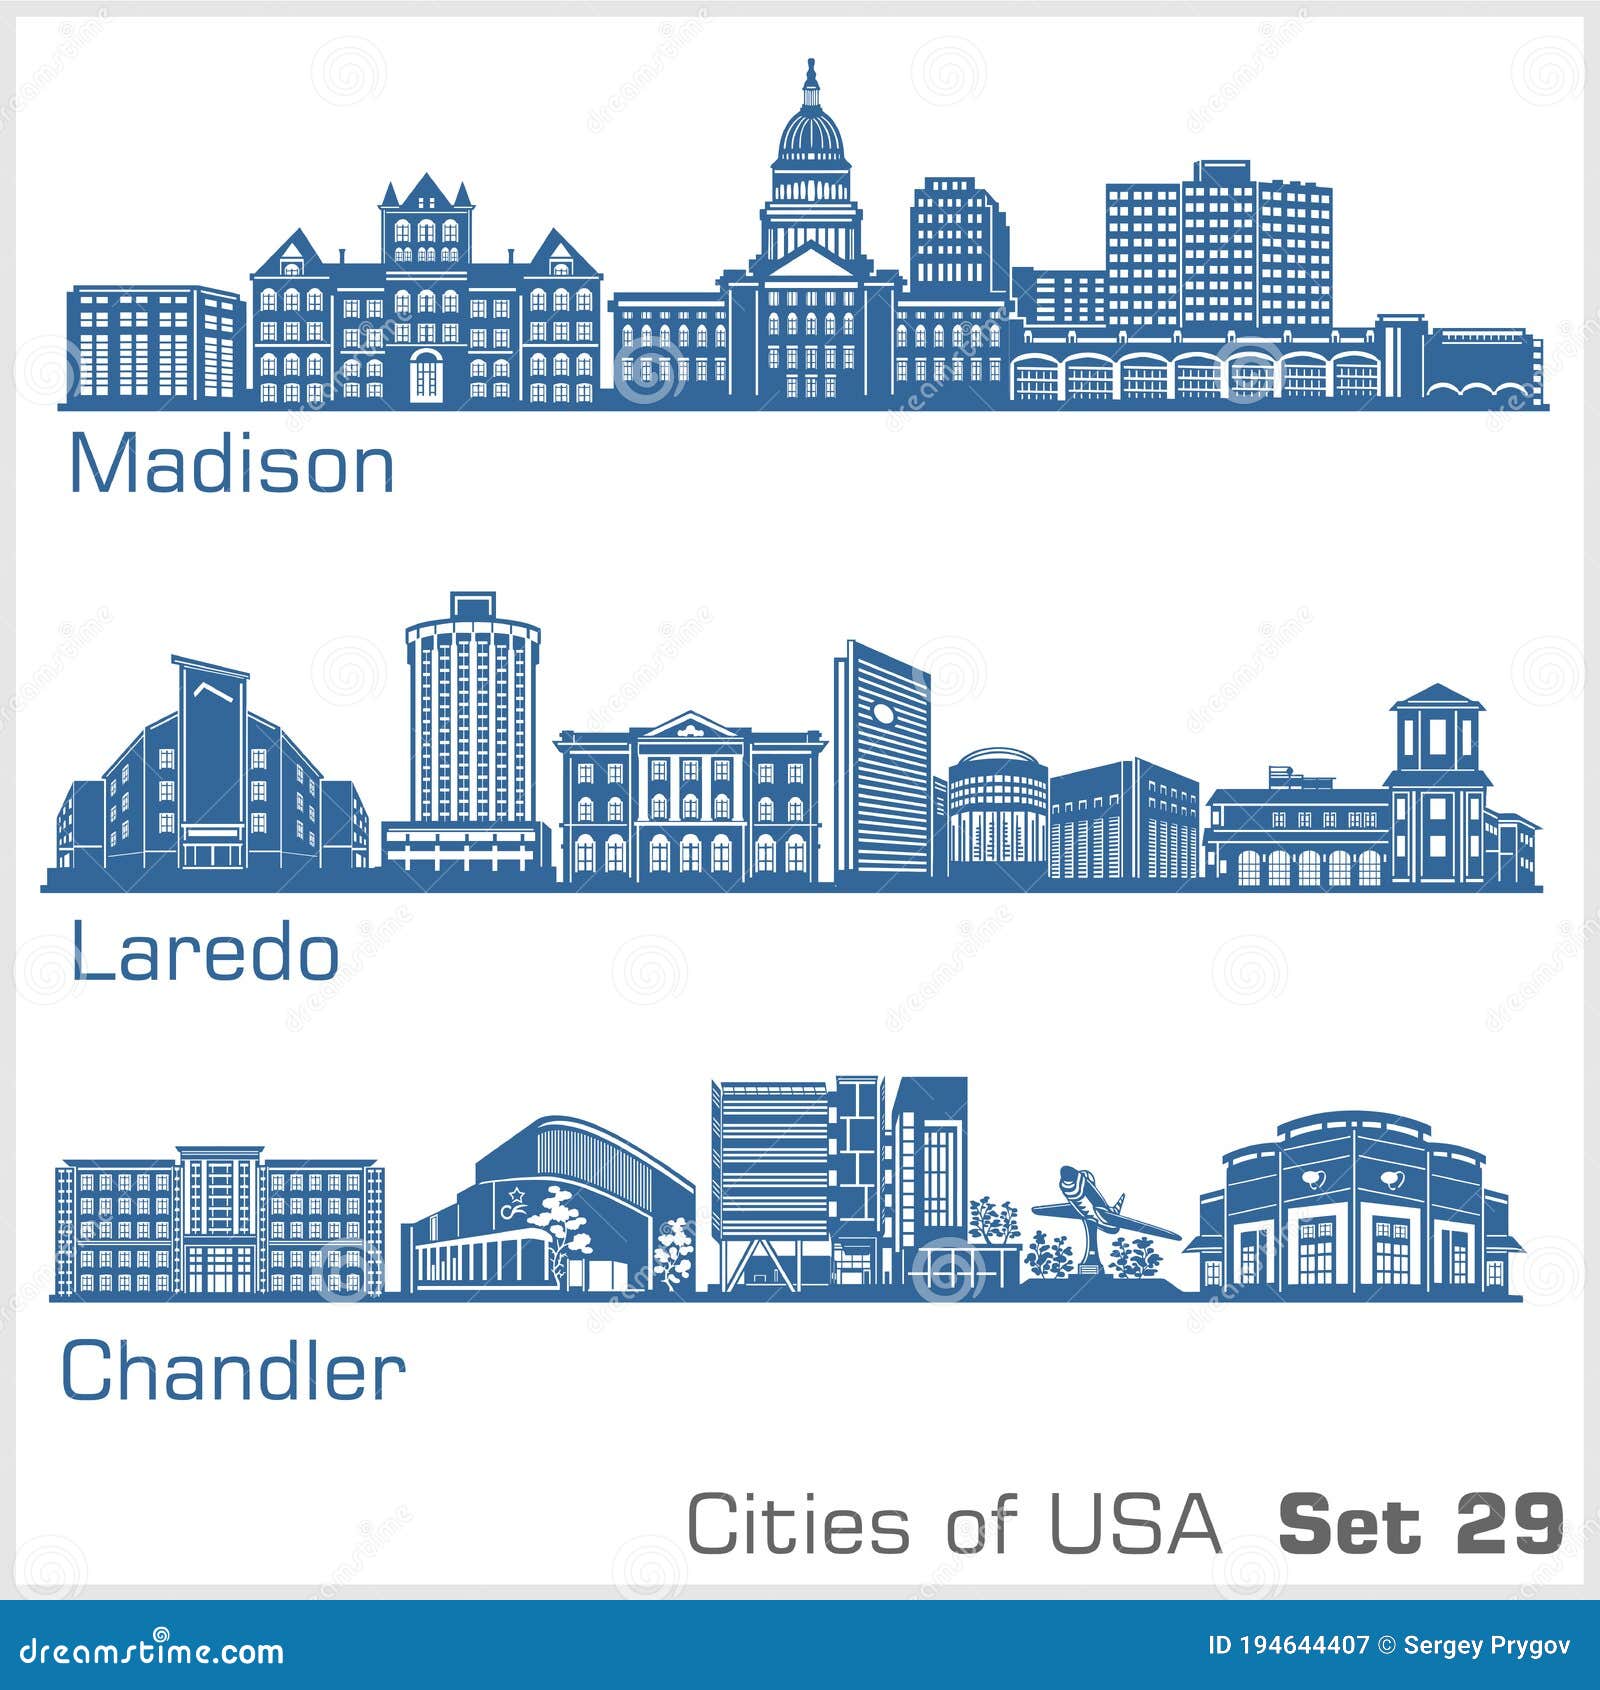 cities of usa - madison, laredo, chandler. detailed architecture. trendy  .